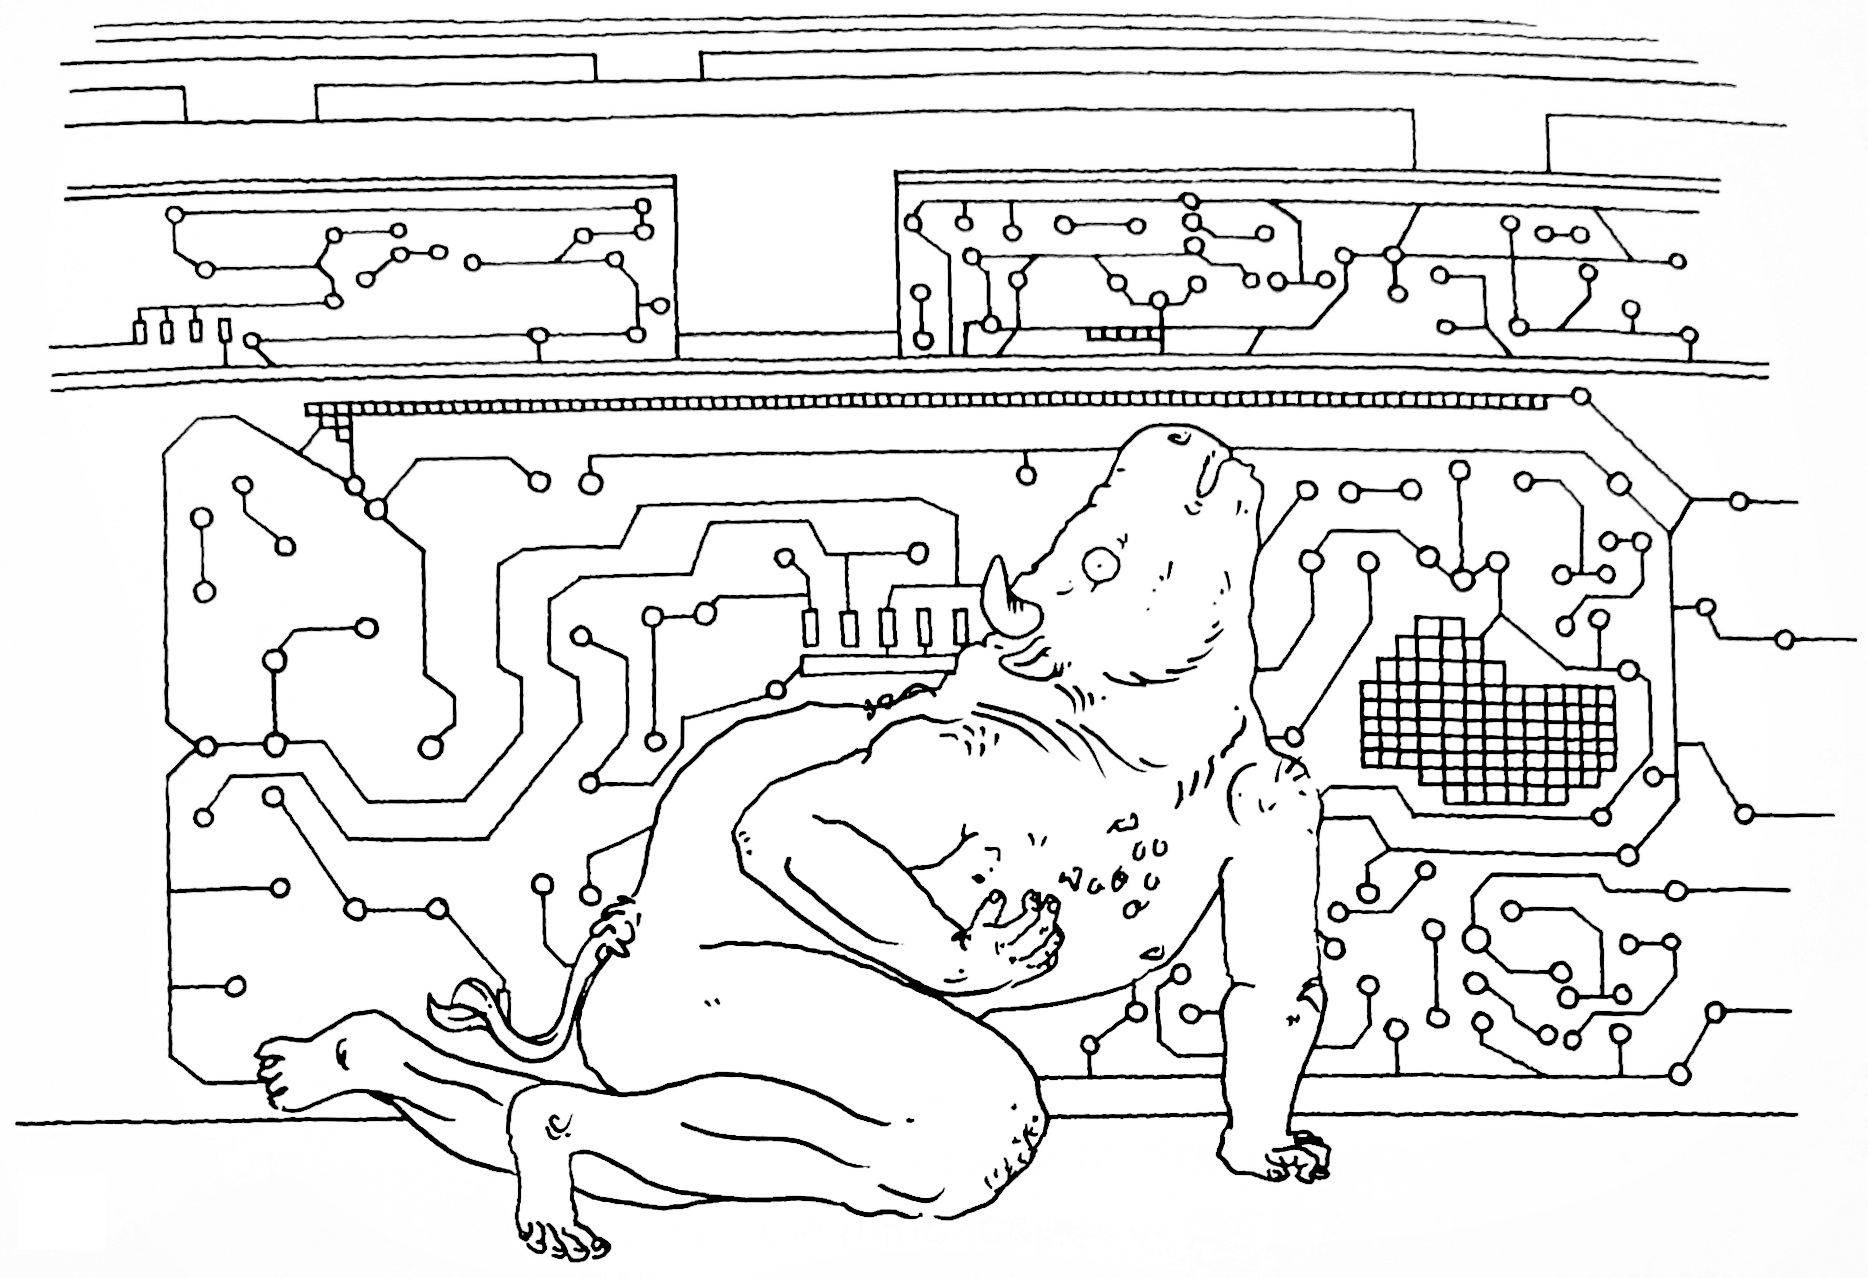 A line drawing of a minotaur clutching its chest, on a background of abstract circuit-esque patterns that seem to form a labyrinth.